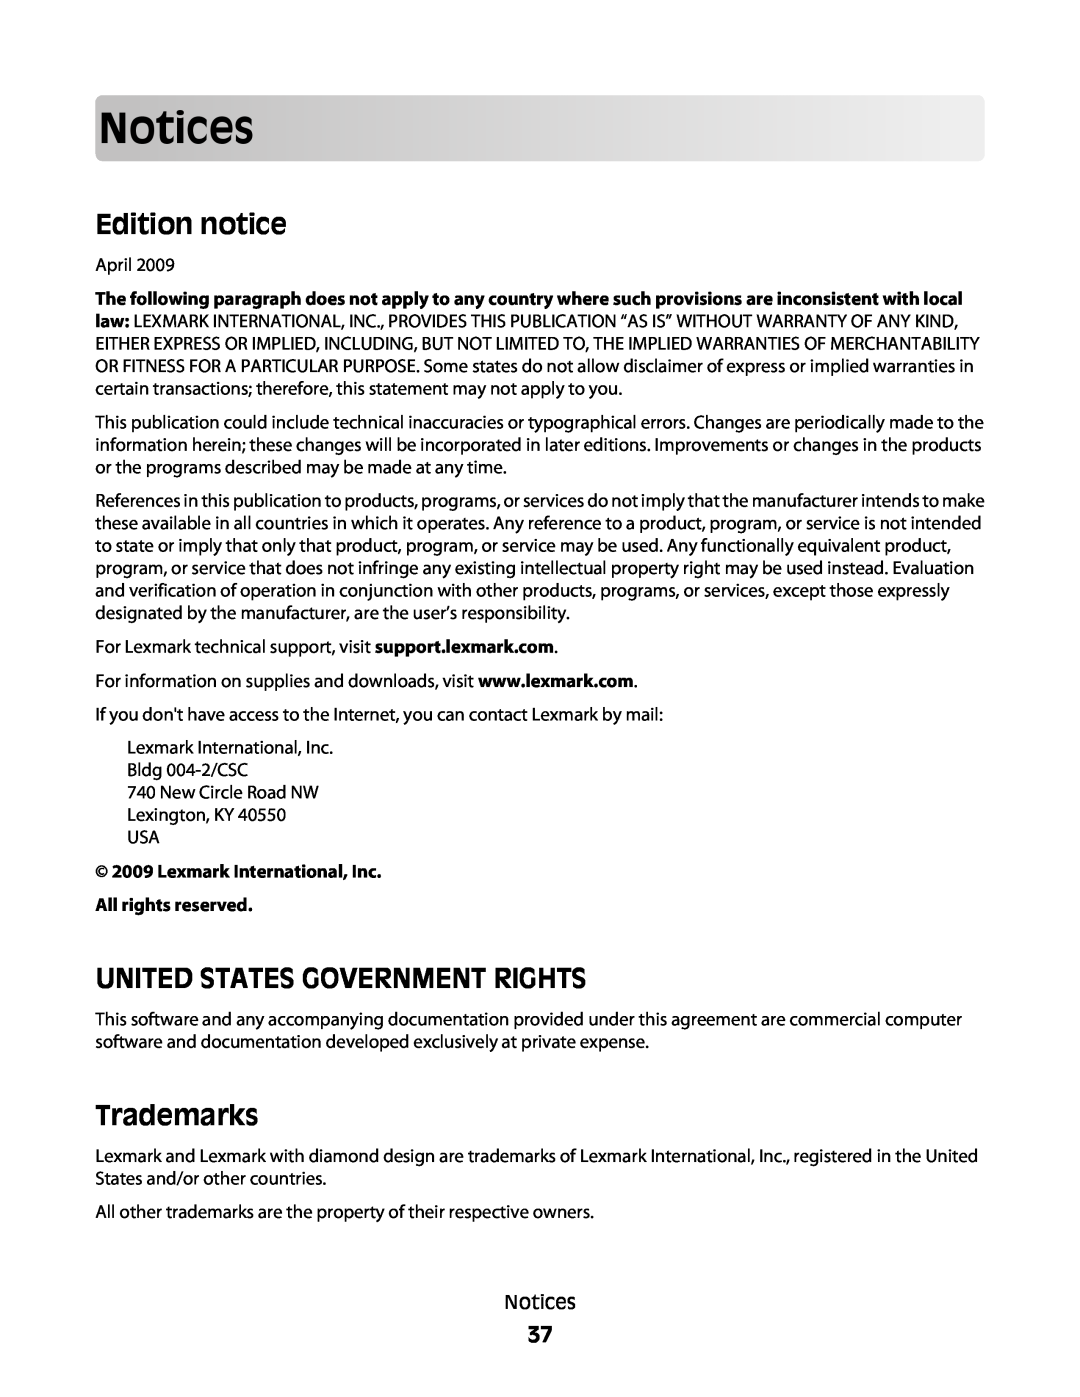 Lexmark S300 manual Notices, Edition notice, United States Government Rights, Trademarks 